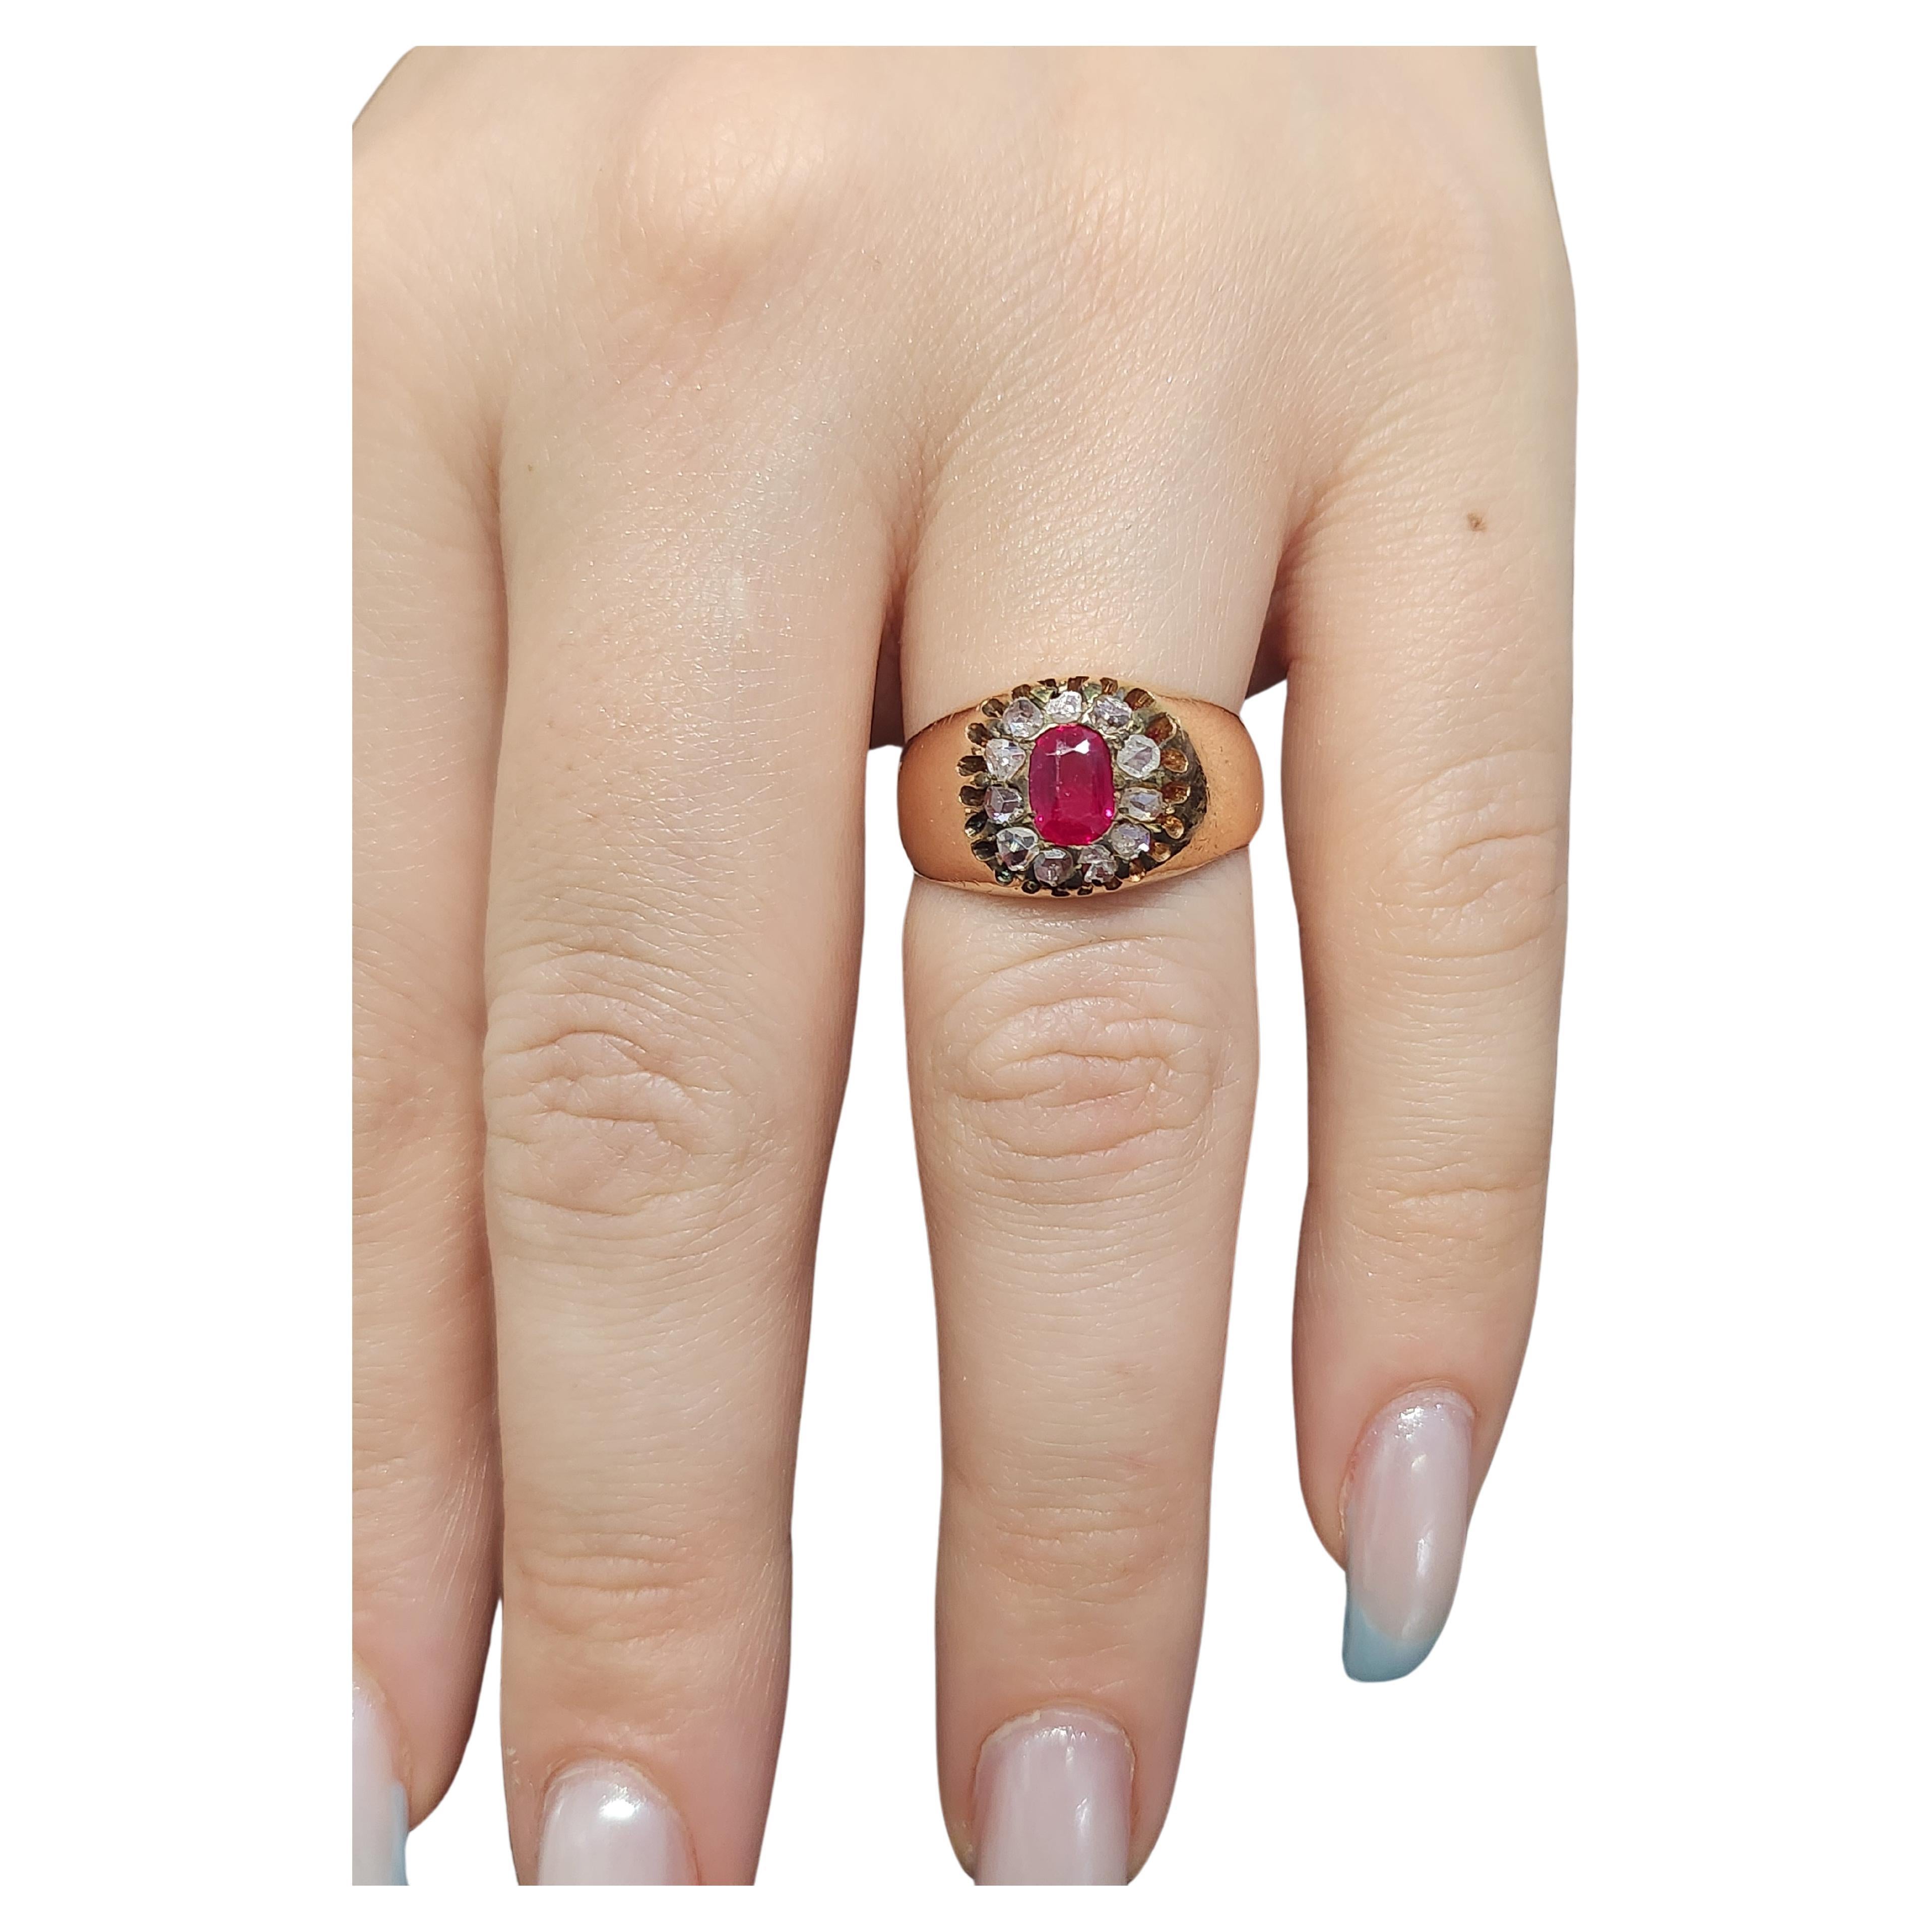 russian ruby ring